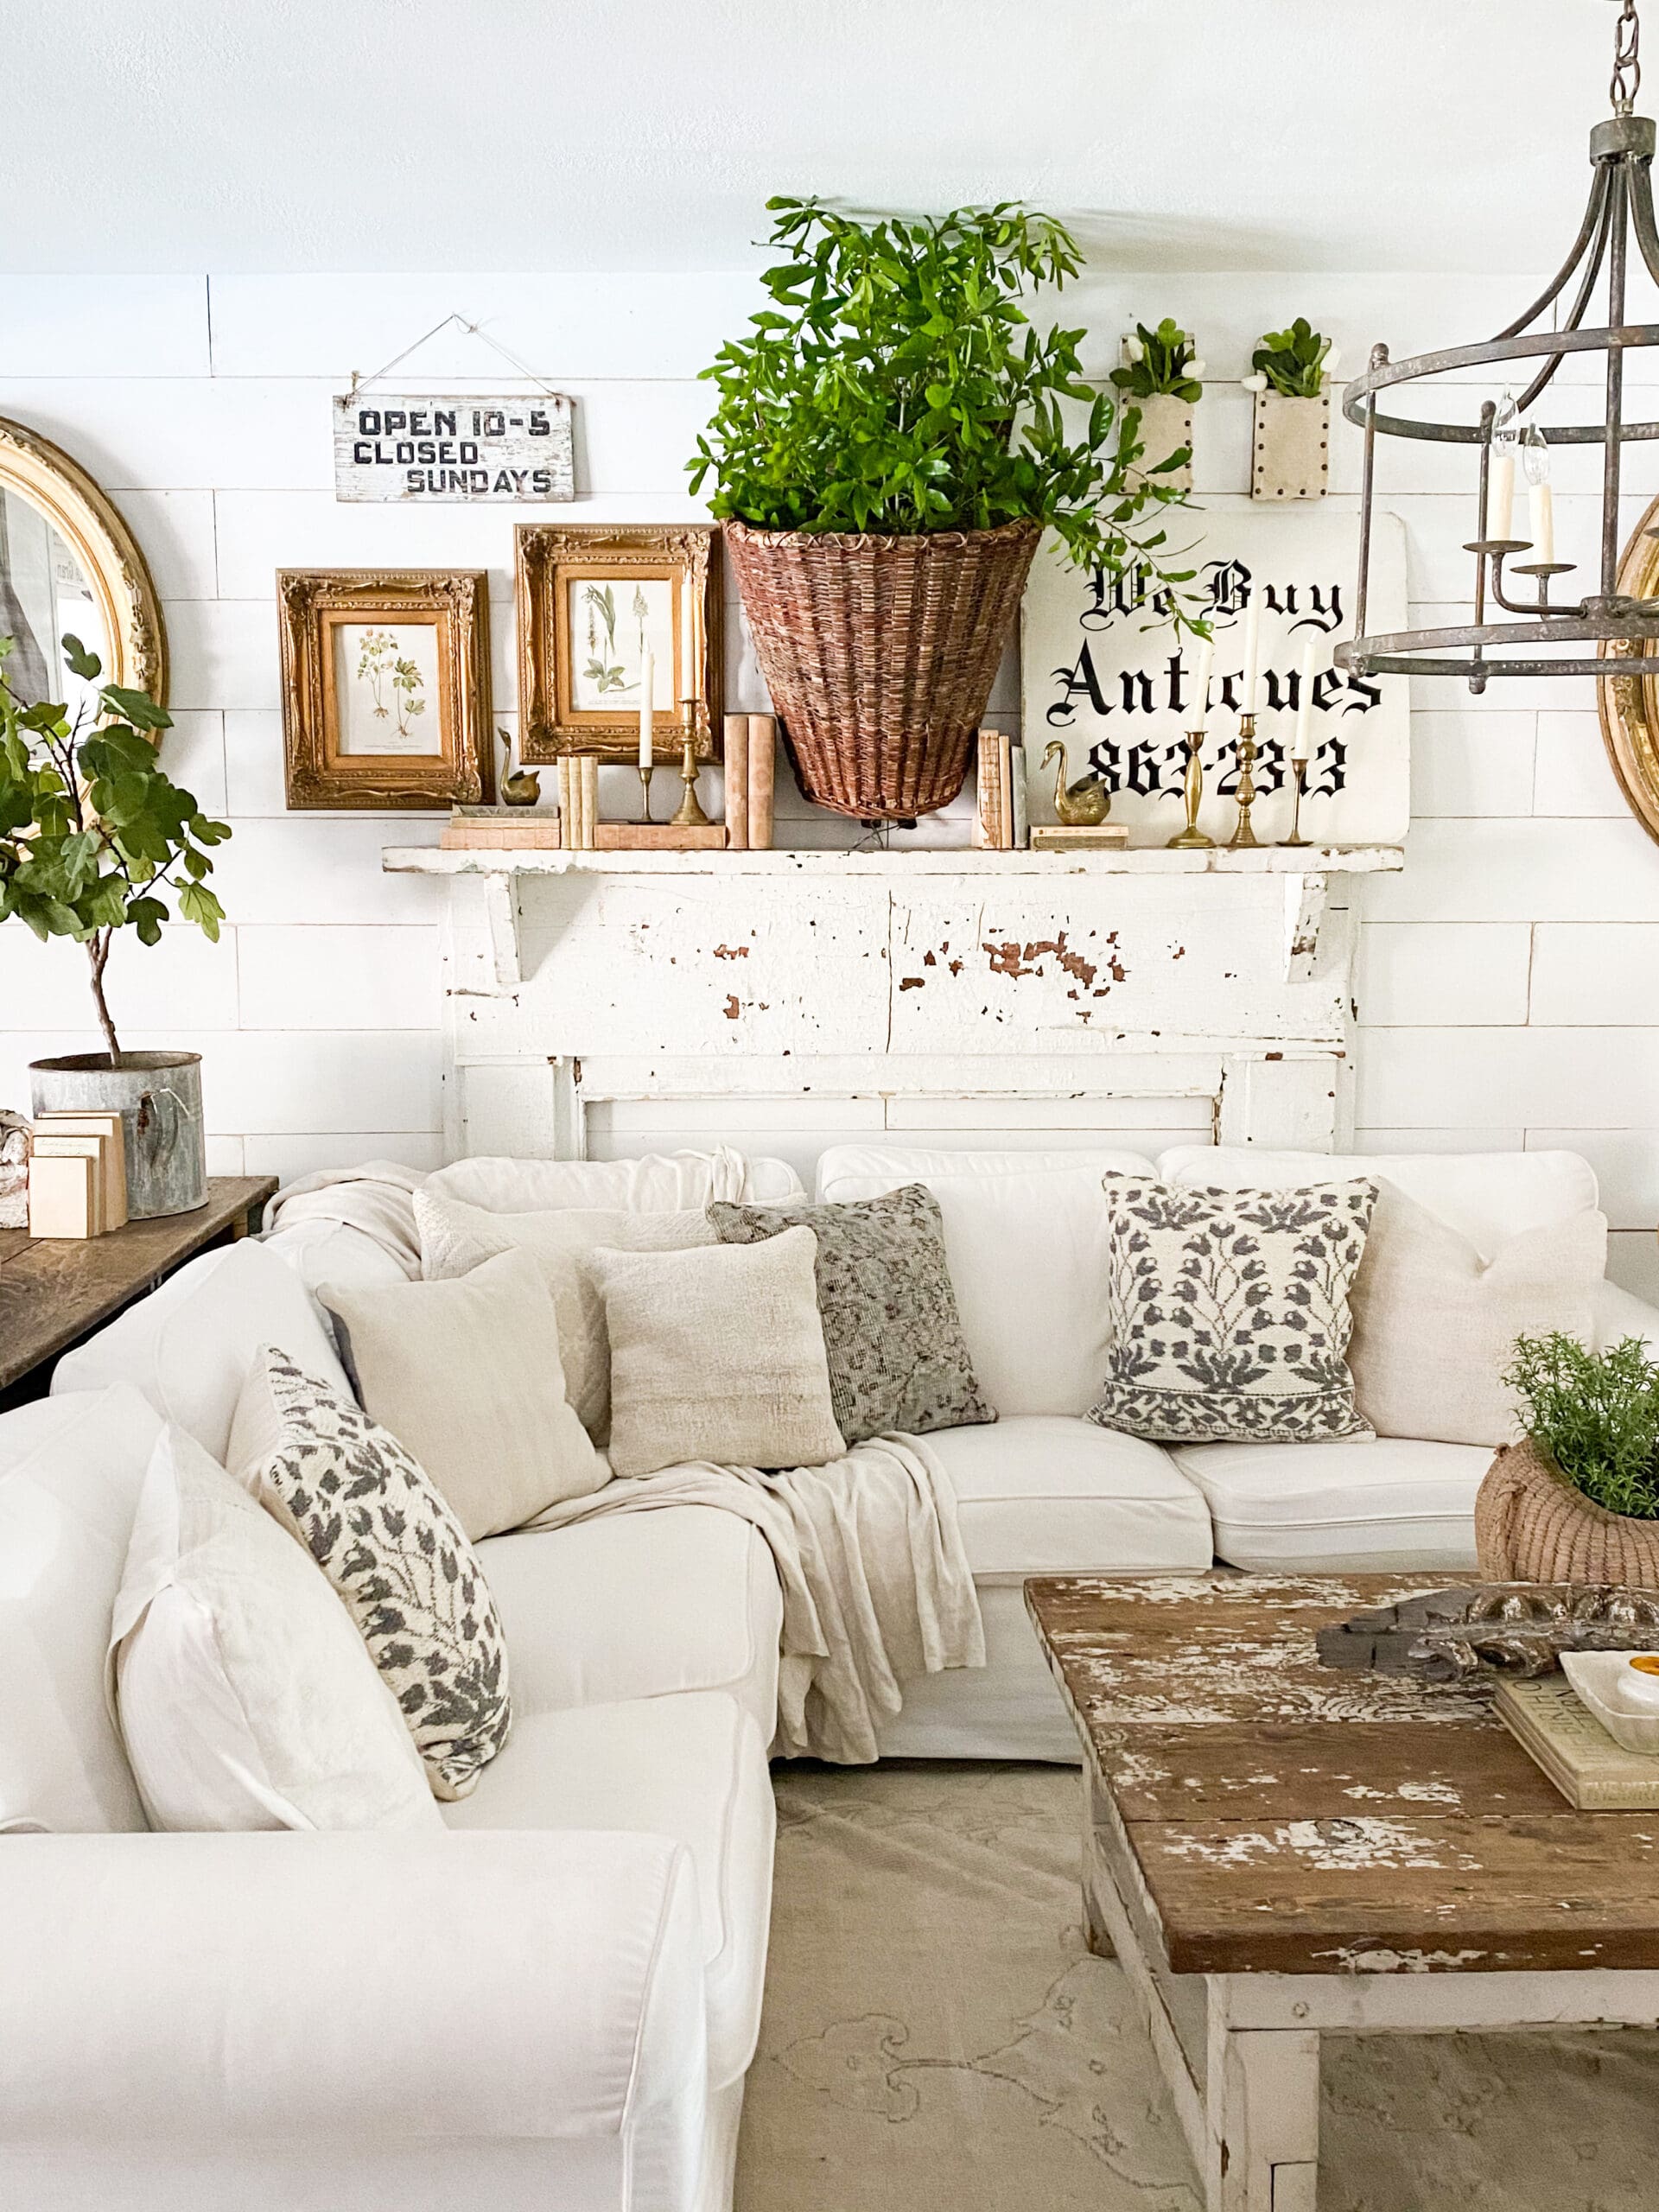 Wide view of family room with white sectional centered in front of vintage white mantel and black & white signs.